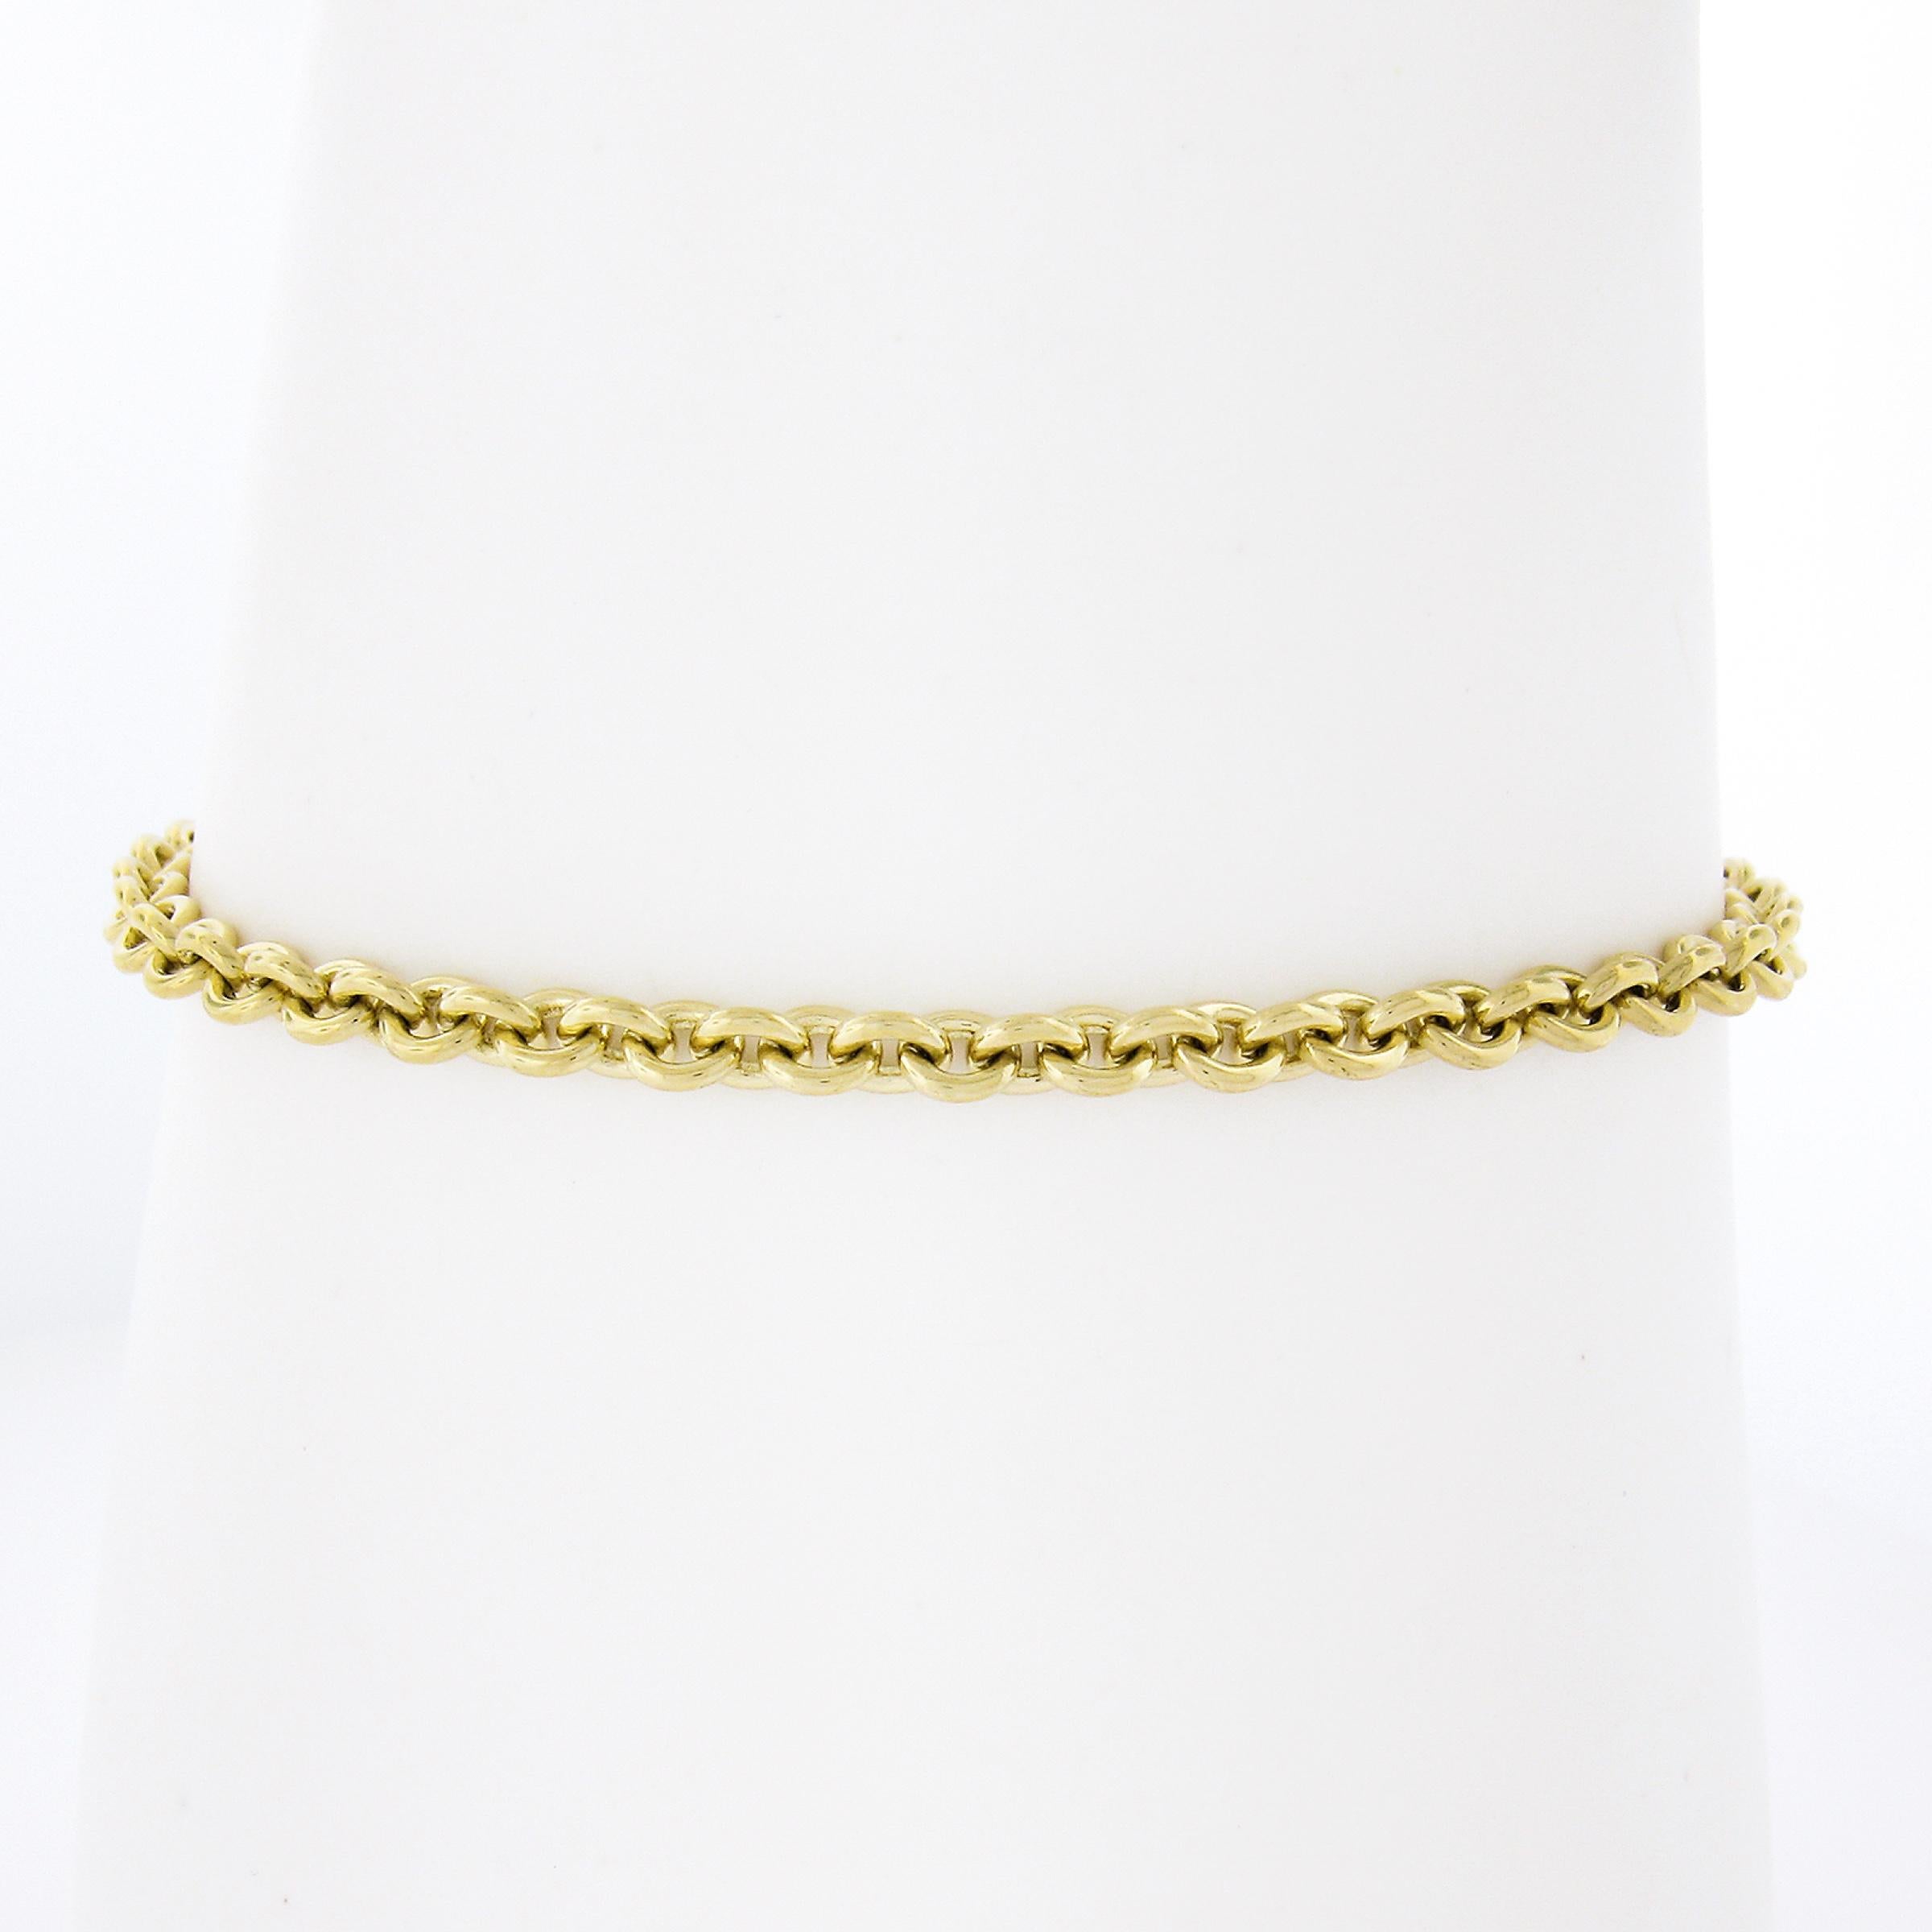 Material: 18K Solid Yellow Gold 
Weight: 9.81 Grams
Chain Type: Open Round Link
Chain Length:	Will comfortably fit up to a 7 Inch wrist
Clasp: Lobster Claw Clasp
Width: 2.4mm
Condition: Excellent condition!
Stock Number: MK-69050133-23120112-EY